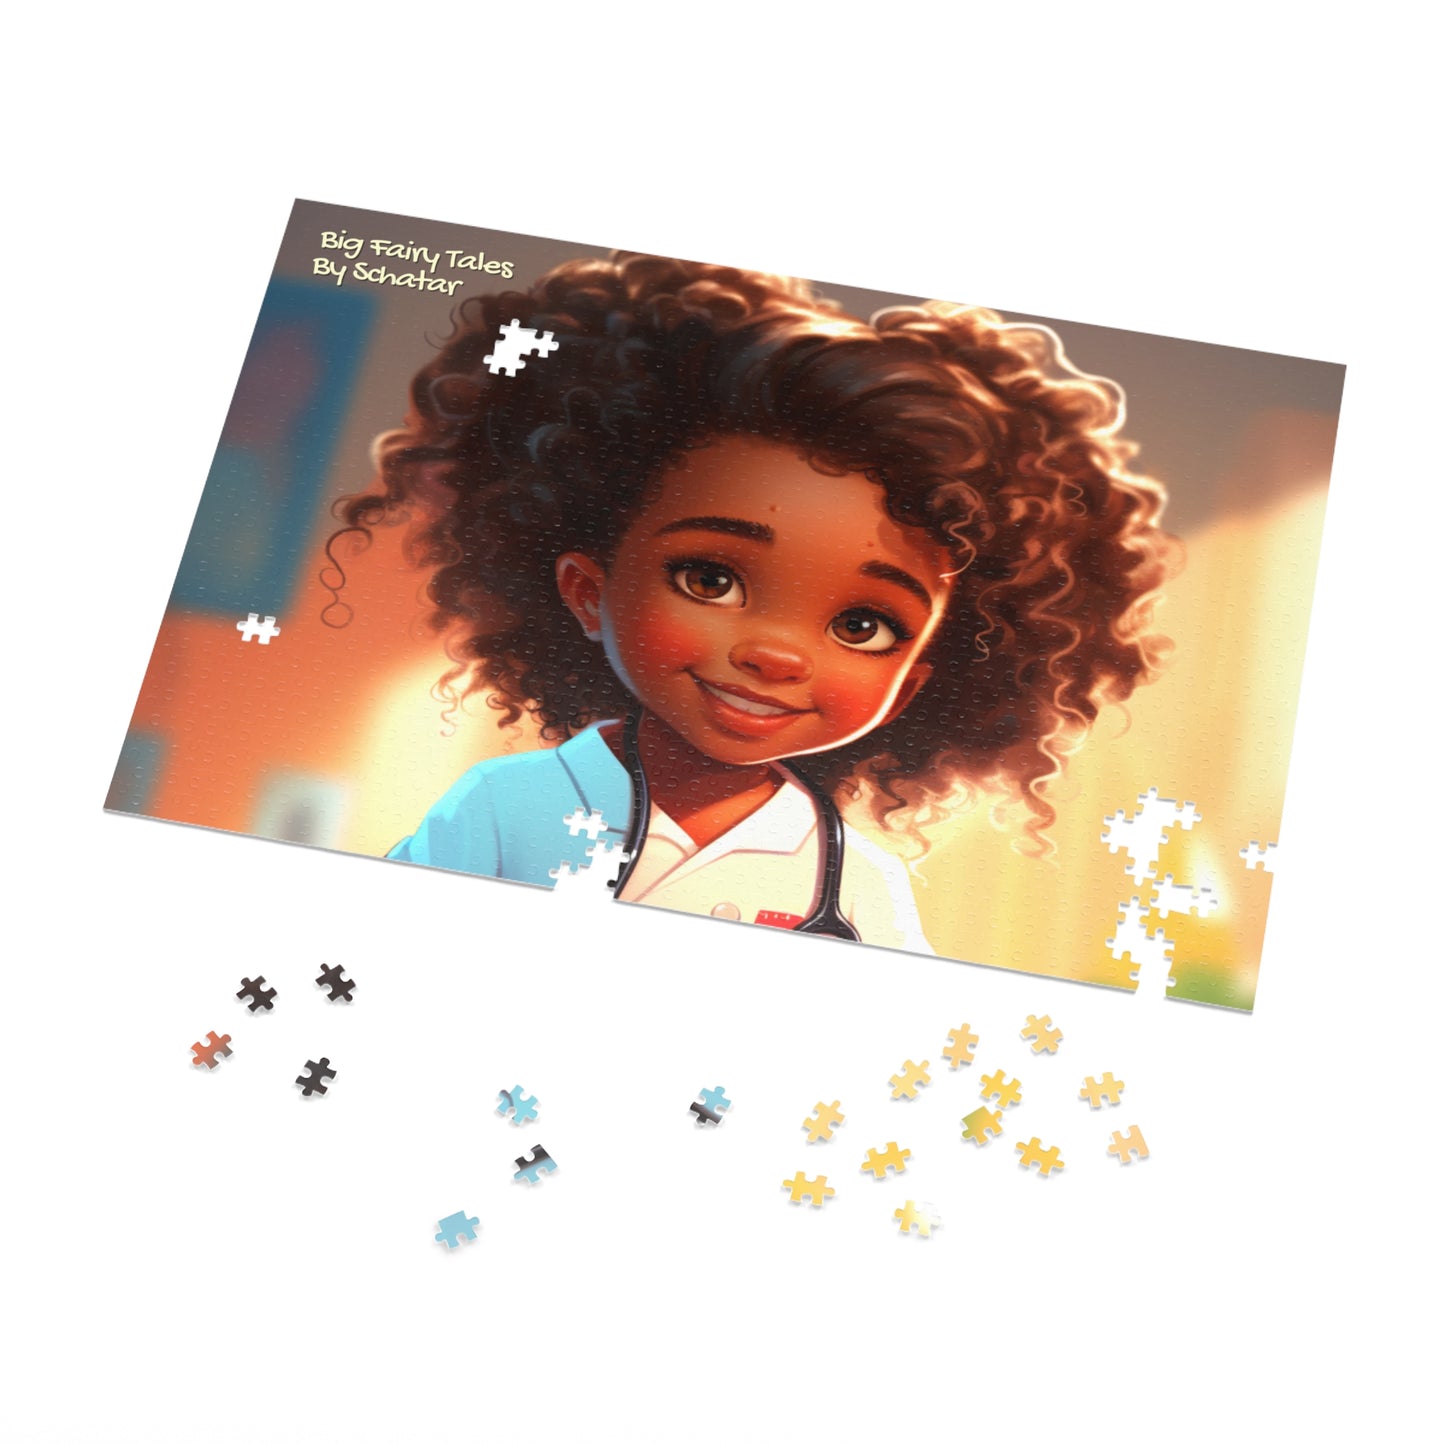 Nurse - Big Little Professionals Puzzle 19 From Big Fairy Tales By Schatar